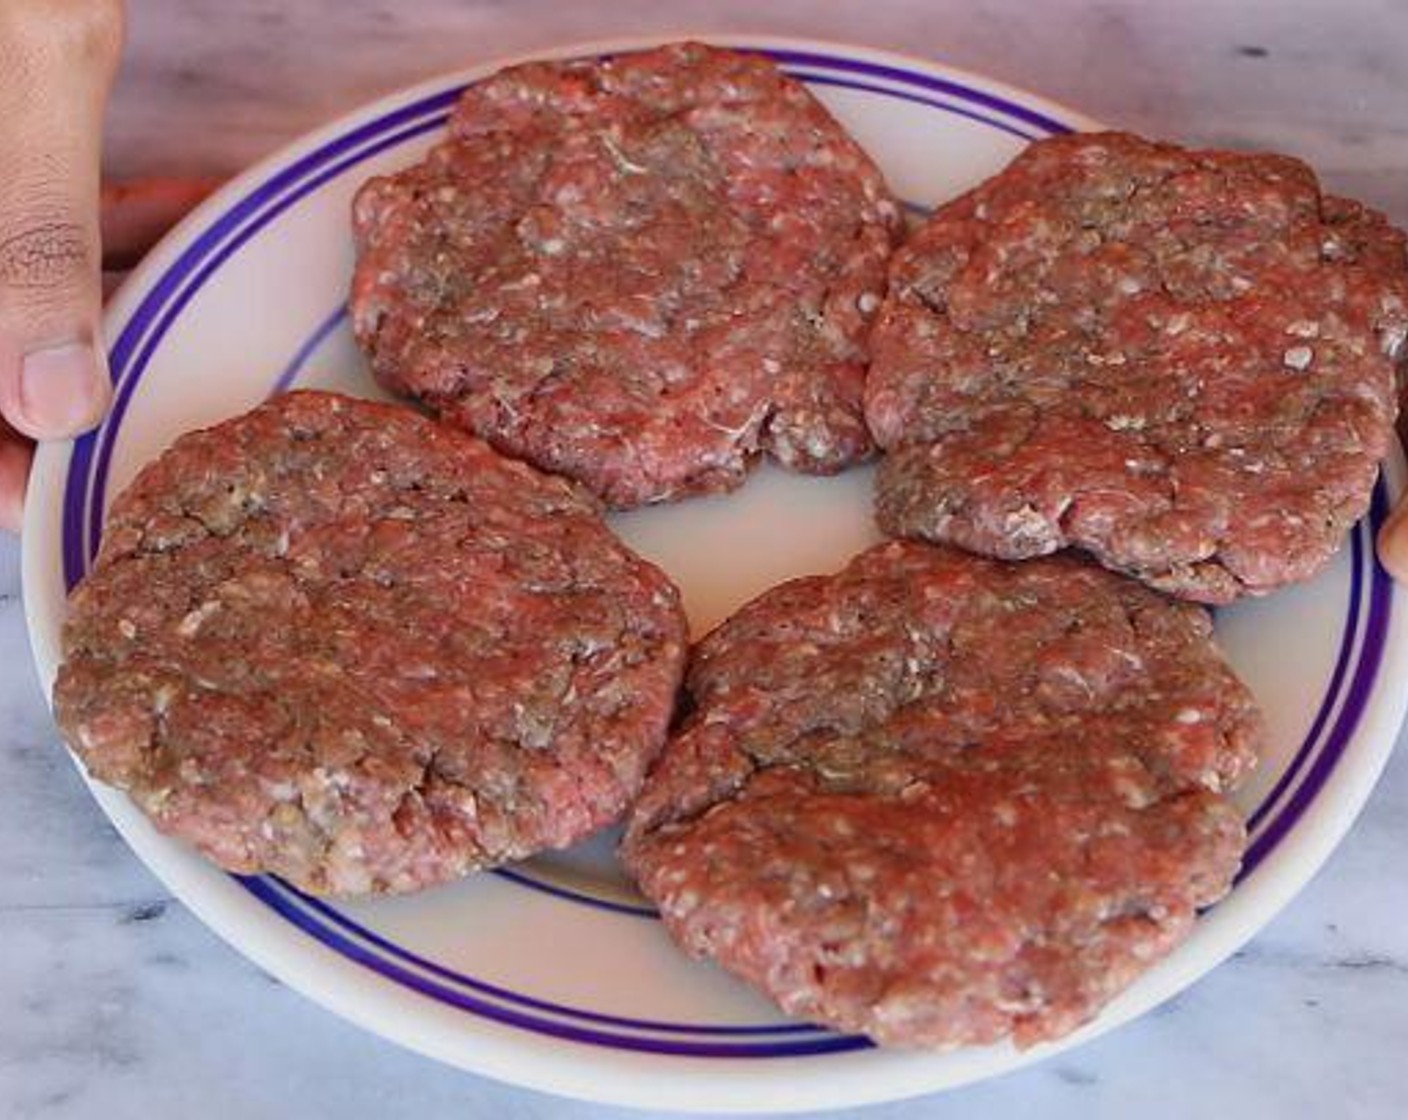 step 3 Divide the meat into 4 portions and form each portion into a patty. Cook the patties in the reserved bacon grease for 5-6 minutes.